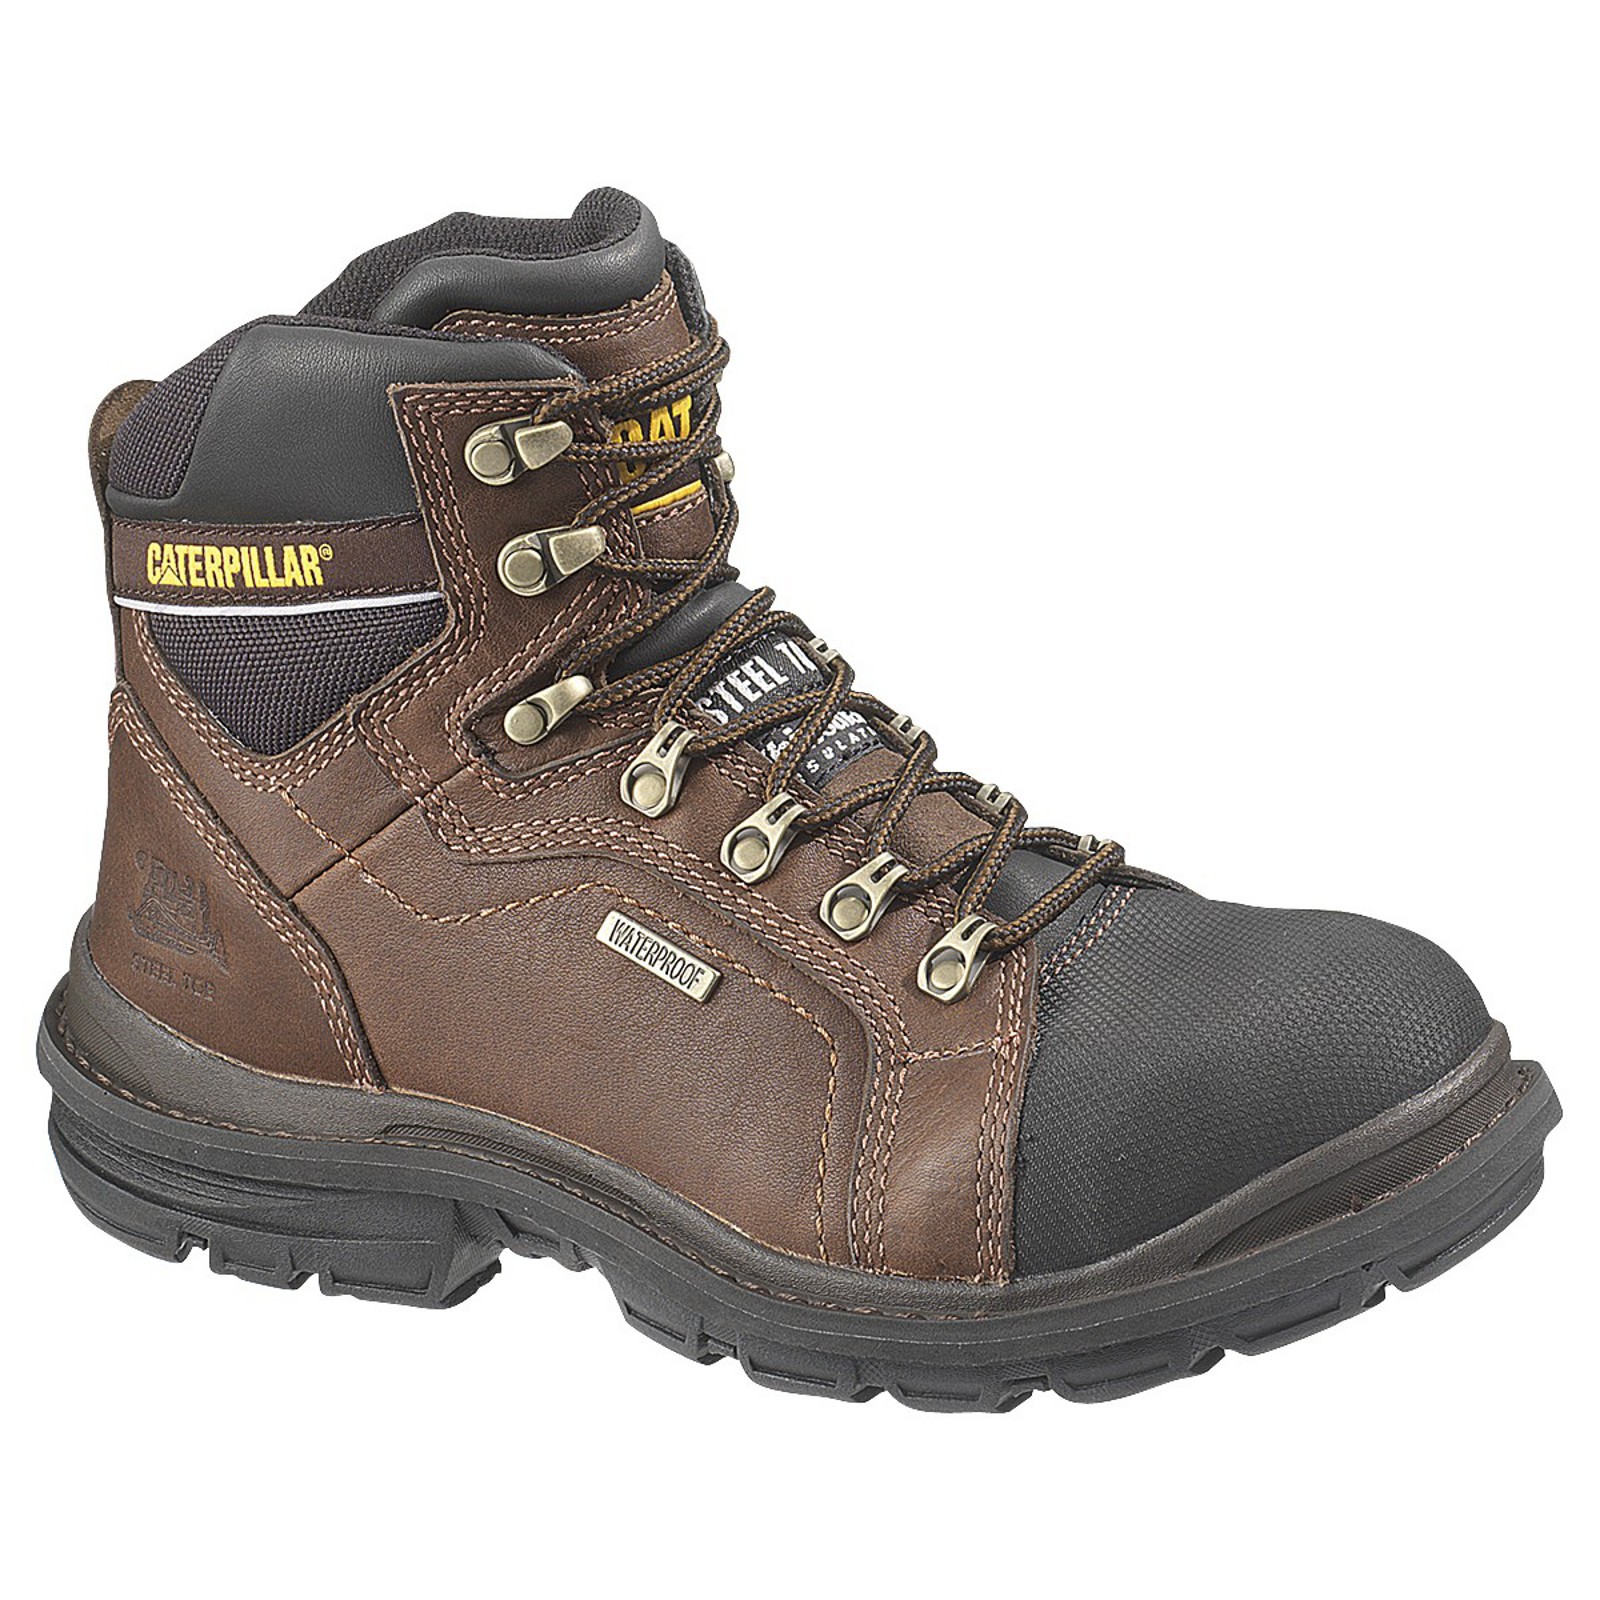 Cat Footwear Men's Manifold 6" Leather Steel Toe Work Boot P89981 Wide Width Available - Brown